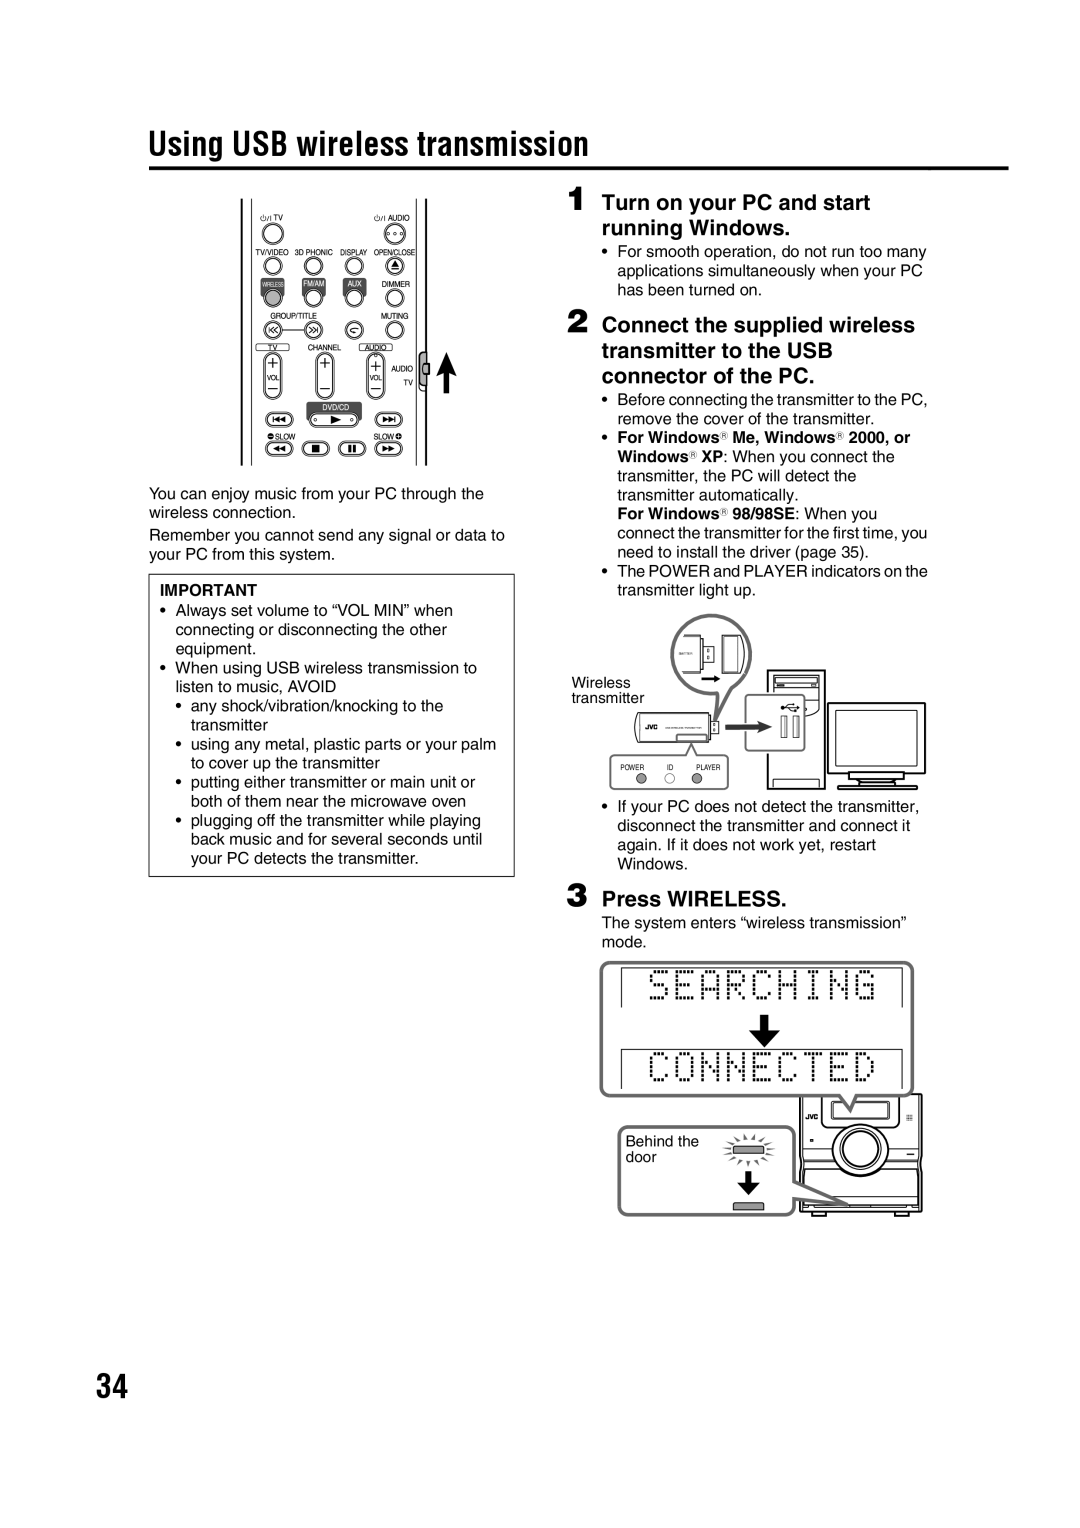 JVC GVT0144-005A manual Using USB wireless transmission, Turn on your PC and start running Windows, Press WIRELESS 